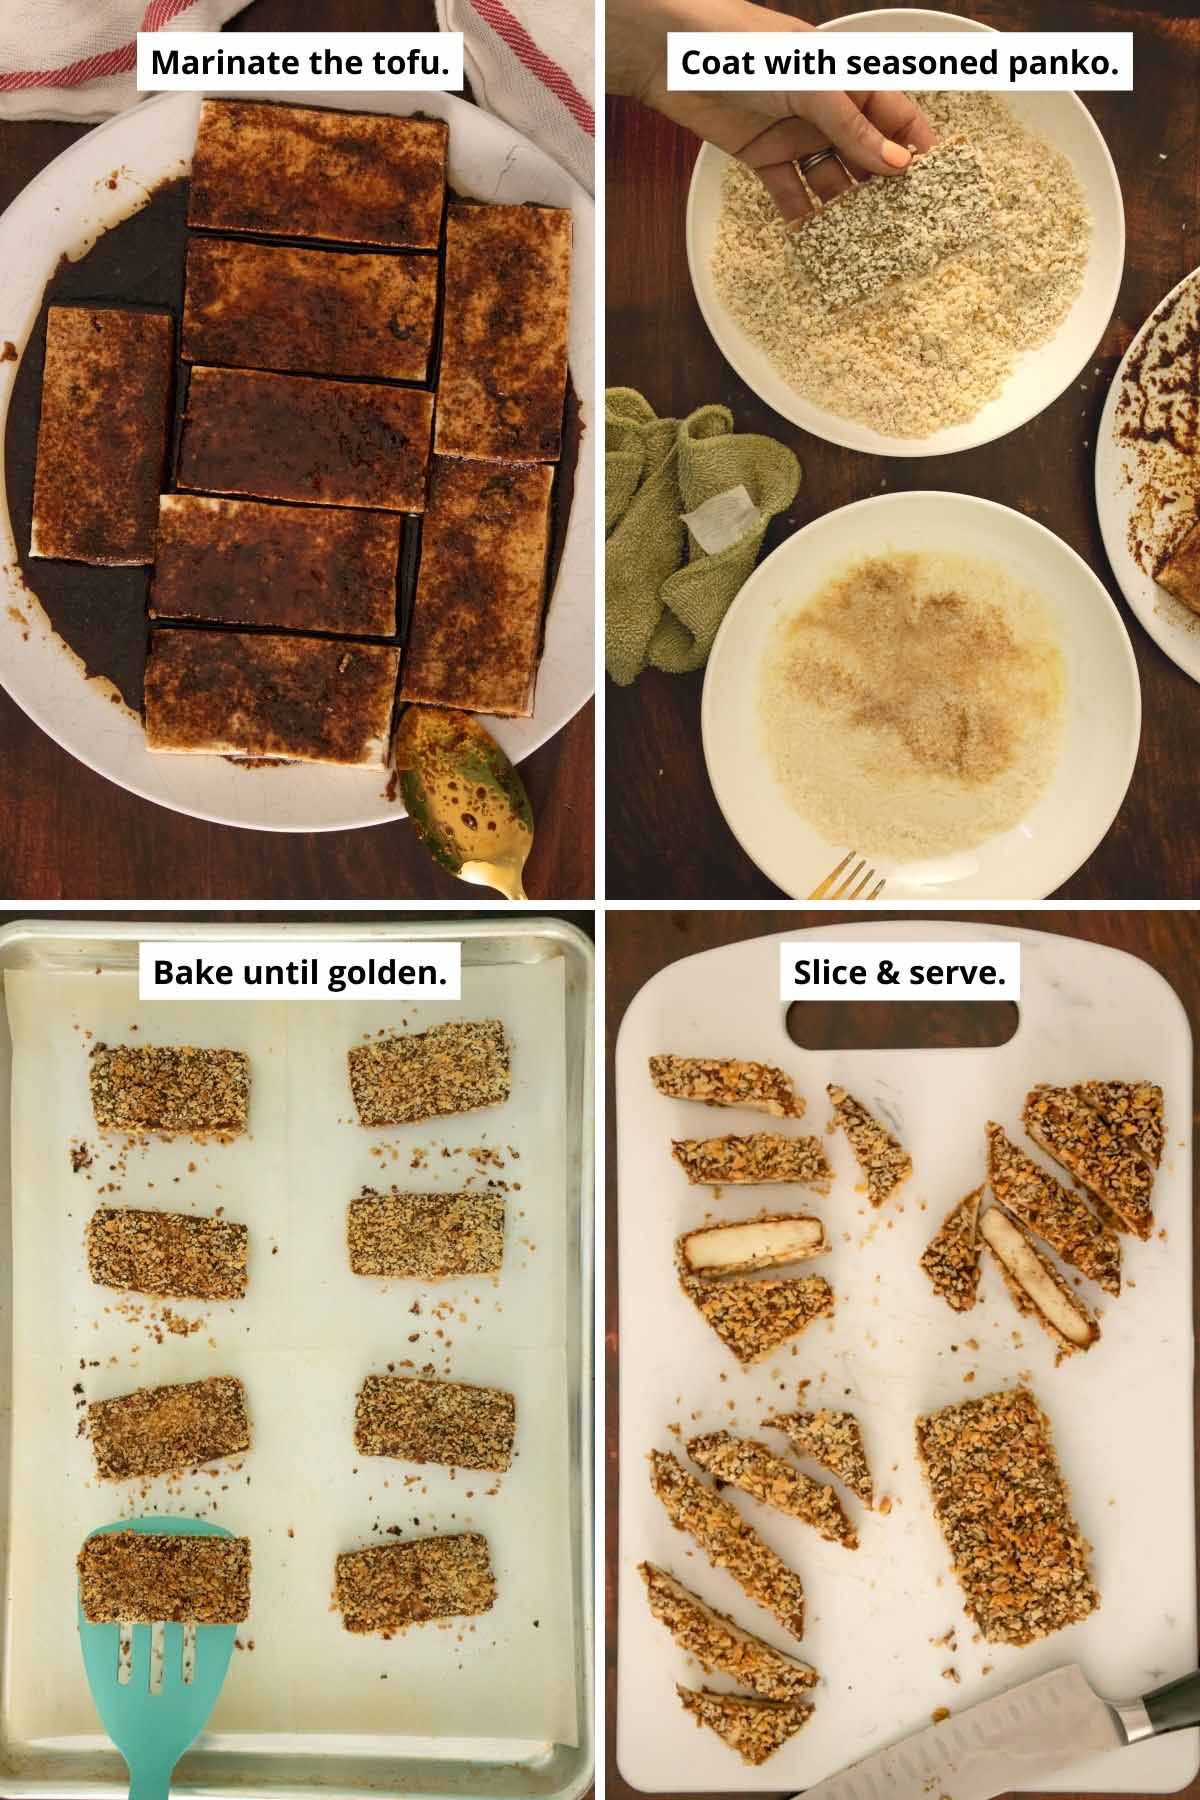 image collage showing marinating tofu, coating it in panko, baked on the baking sheet, and sliced on the cutting board